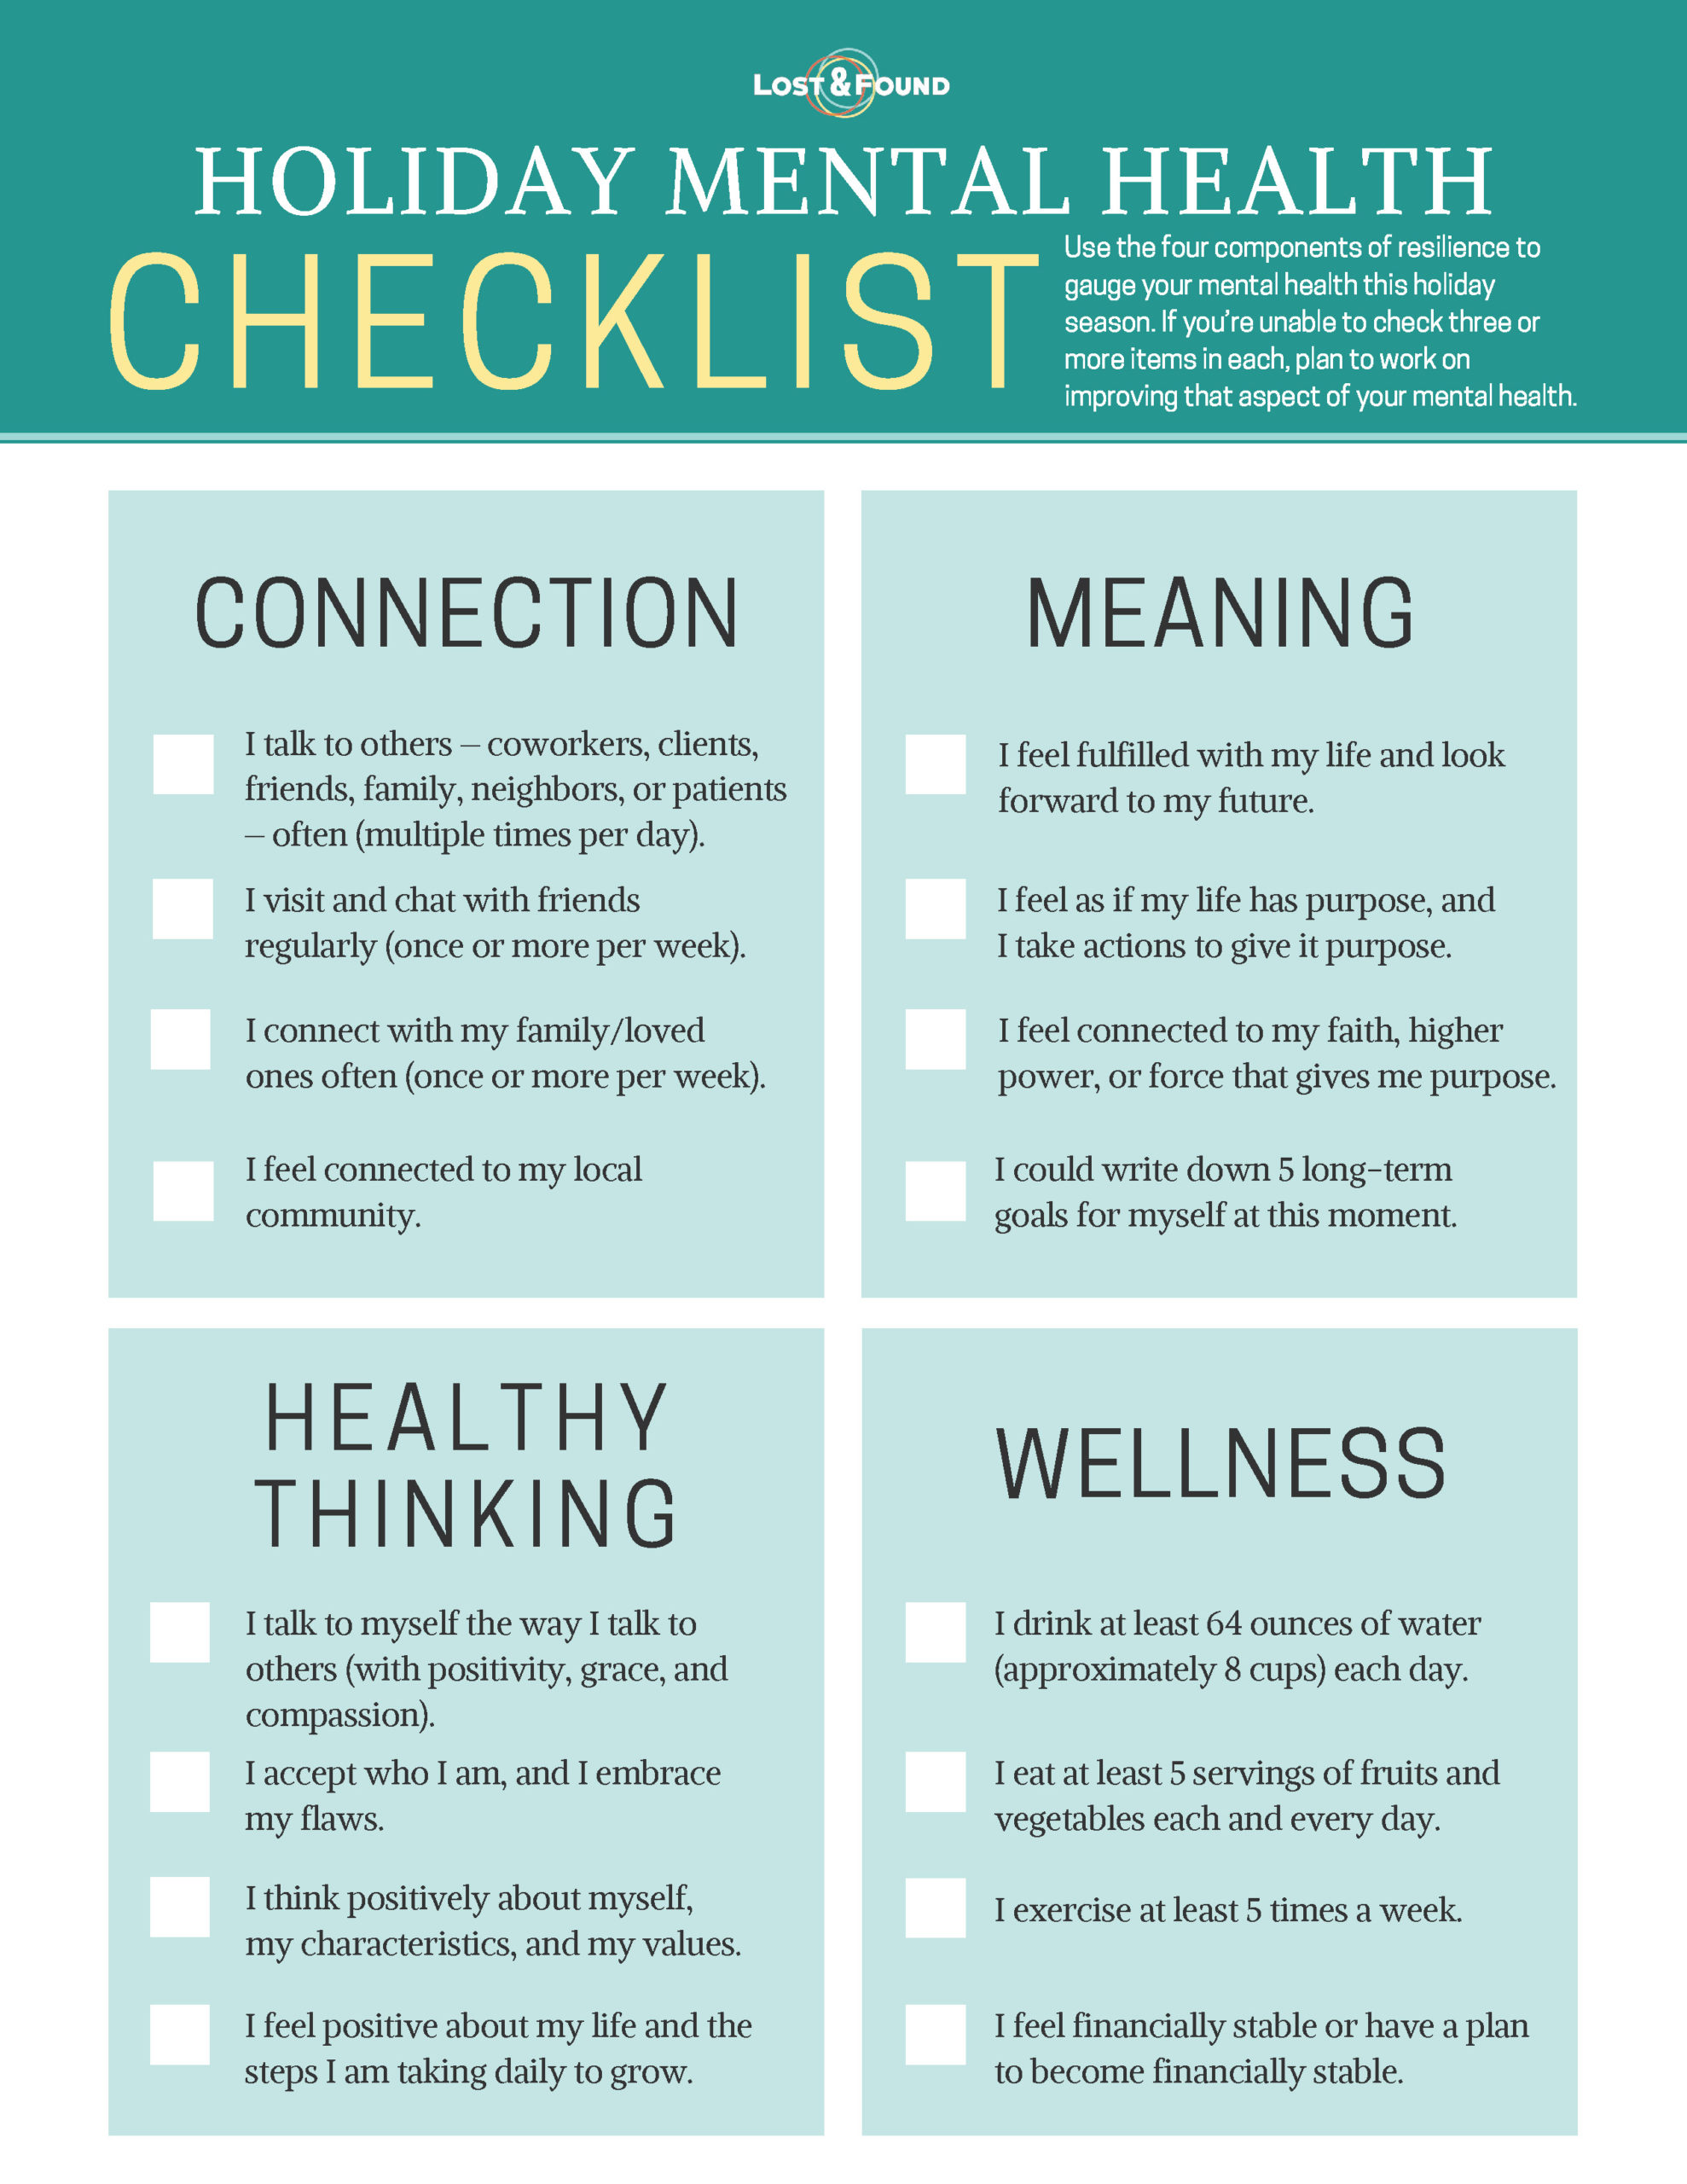 Start your Holiday Mental Health Plan with this checklist Lost&Found